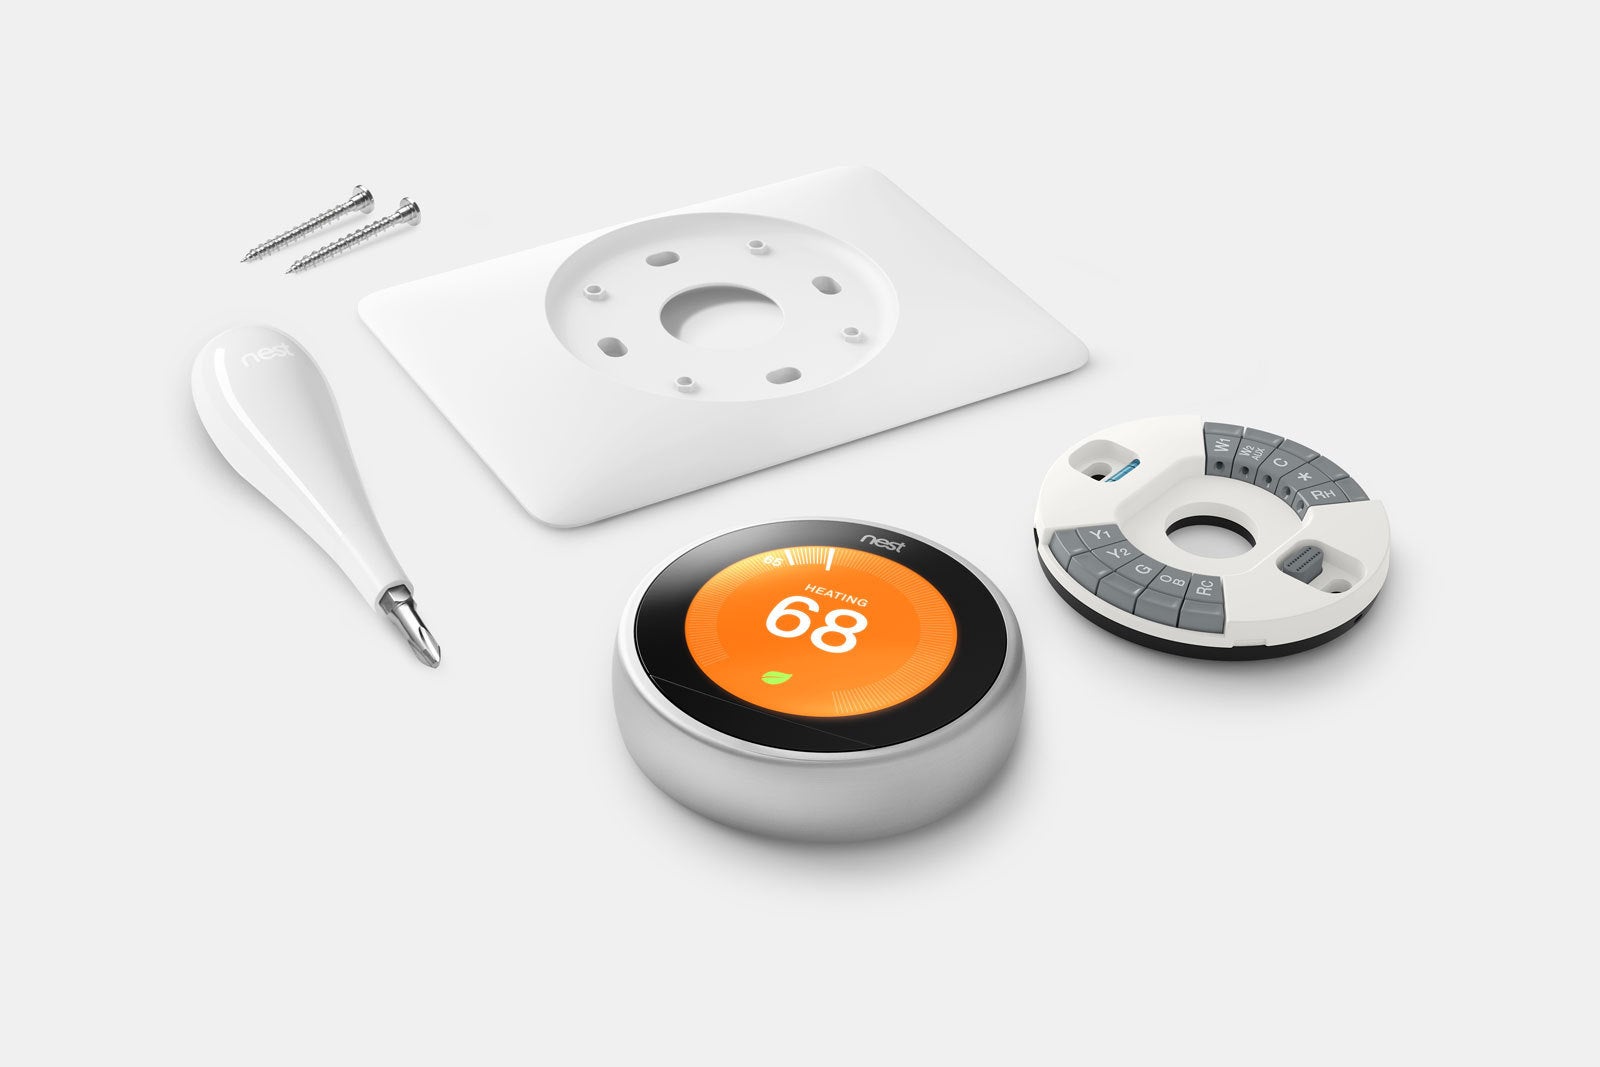 nest-learning-thermostat-3rd-generation-review-all-about-style-techhive